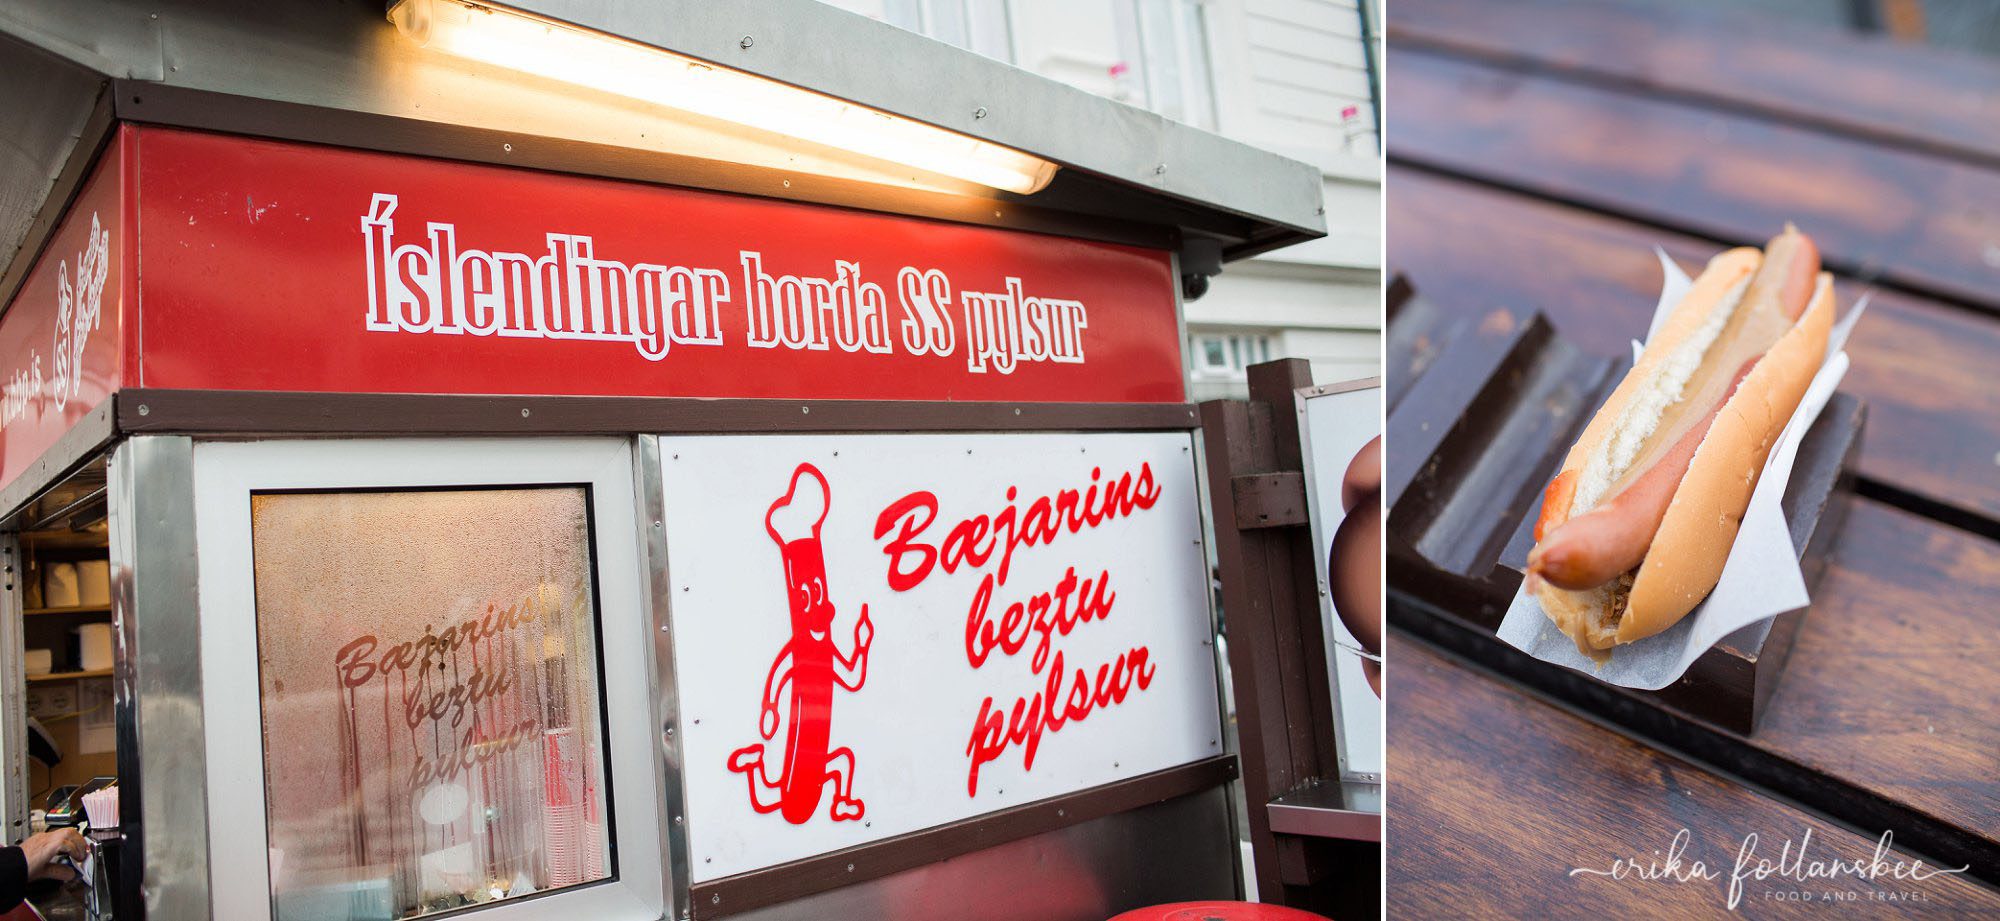 The famous Reykjavik hot dog stand